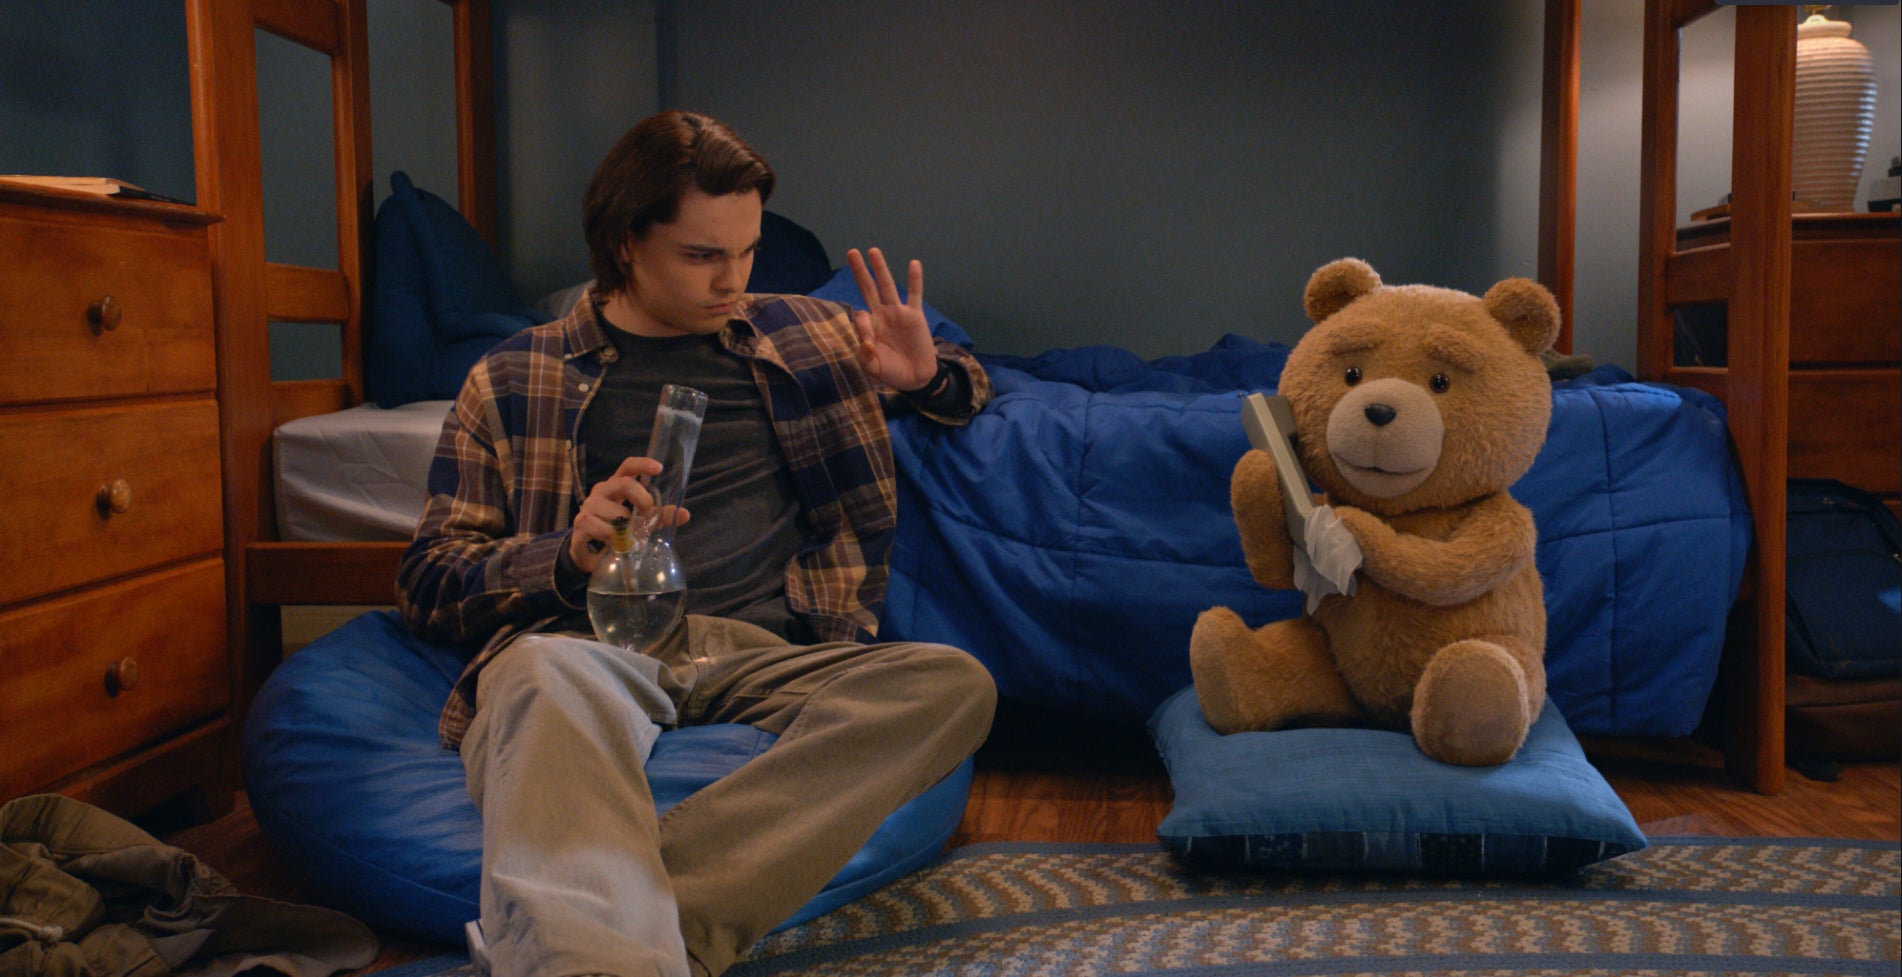 Max Burkholder and Seth MacFarlane in the Peacock prequel series "Ted."